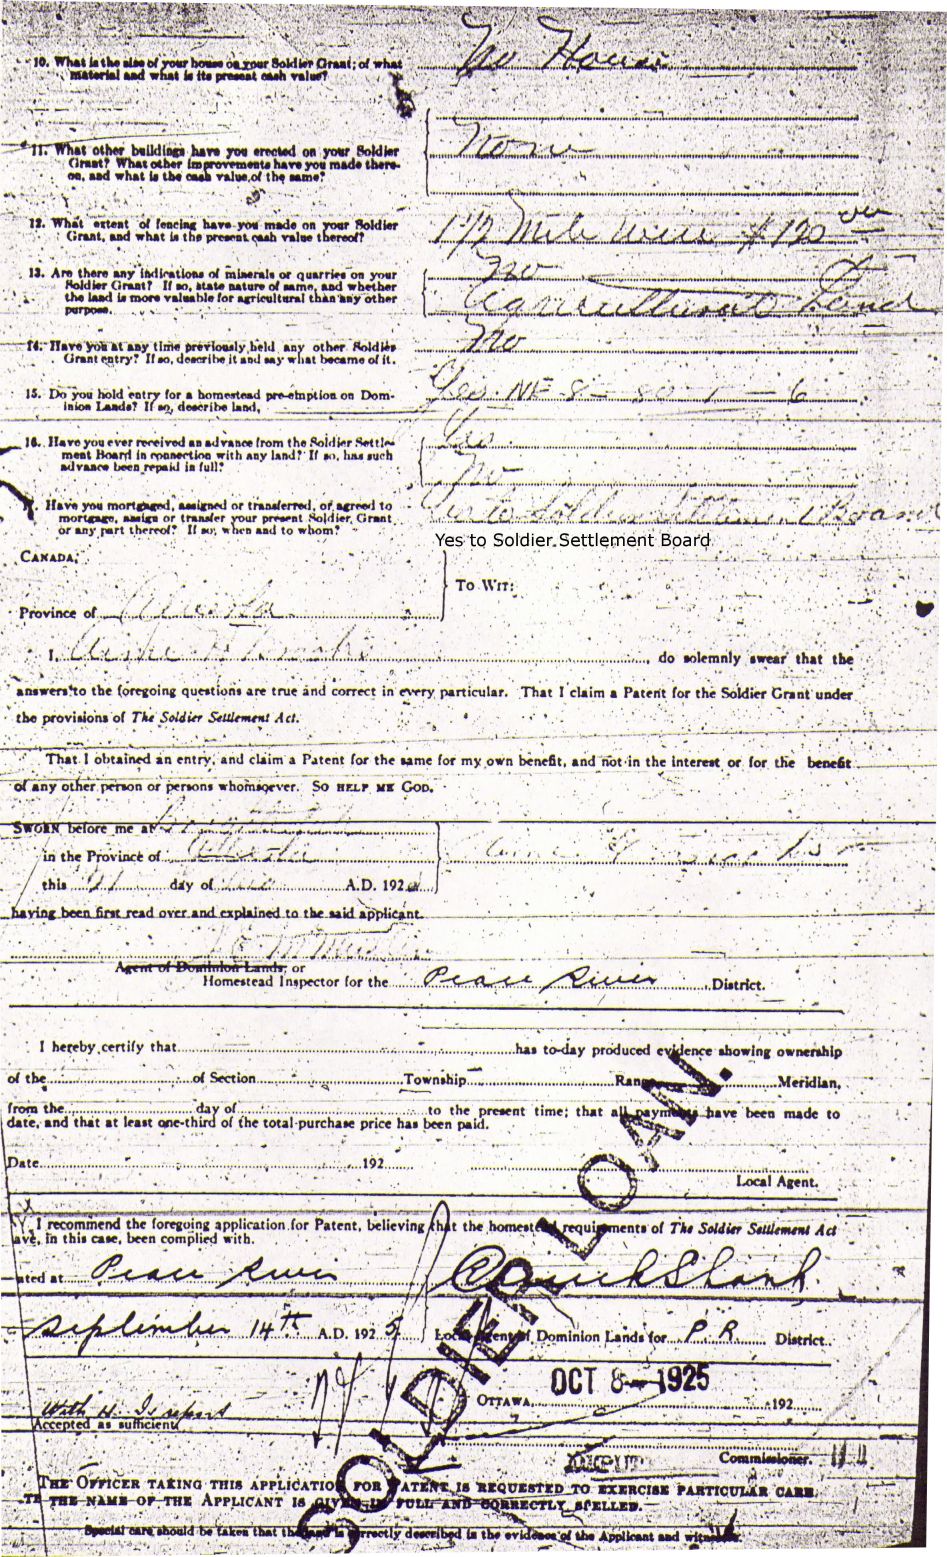 Provincial Archives of Alberta File 3924120 - Aime Brooks -Soldier Grant Form 2 of 2